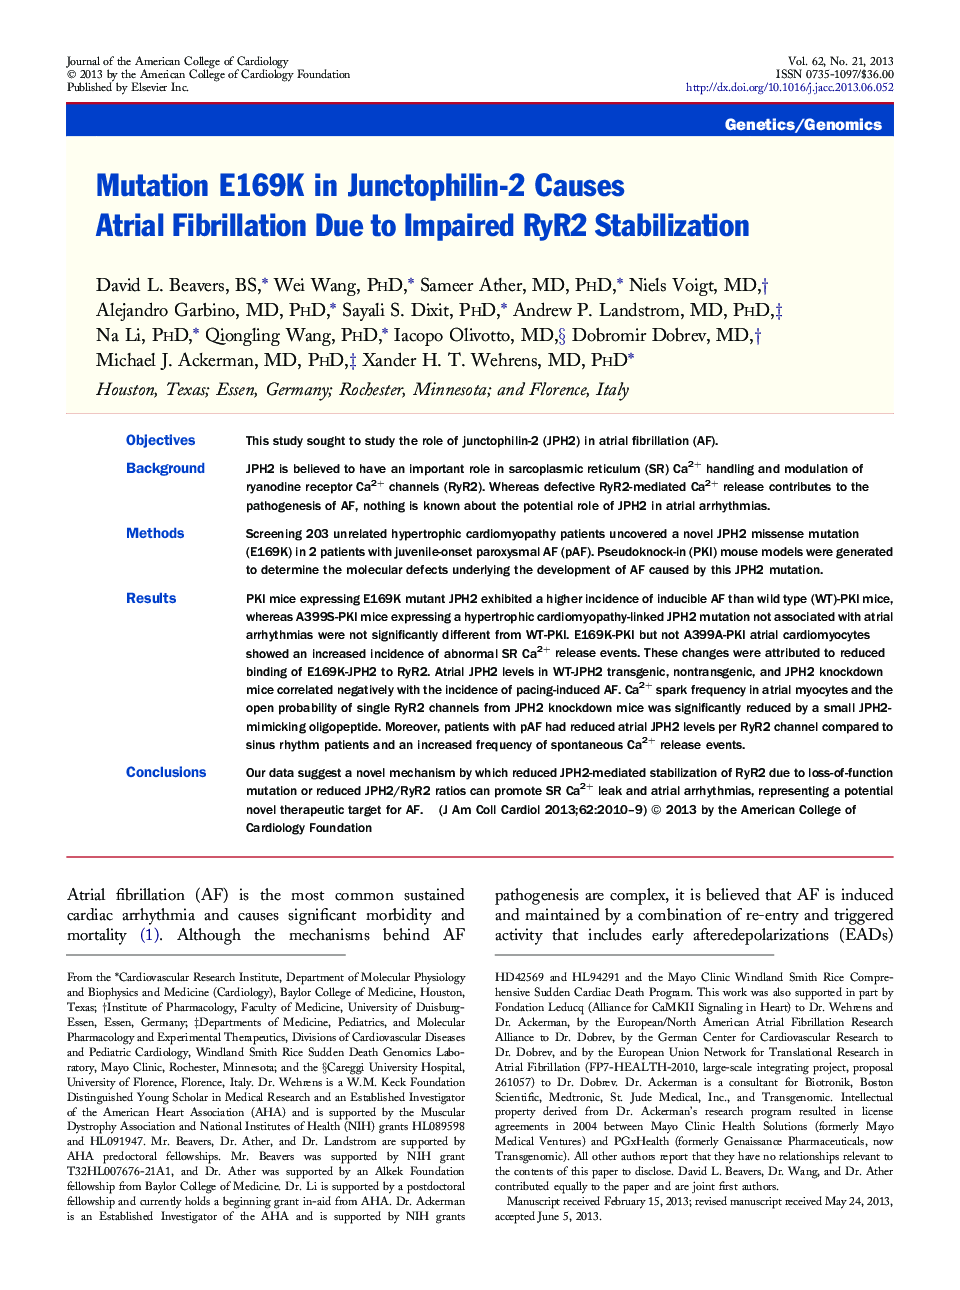 Mutation E169K in Junctophilin-2 Causes Atrial Fibrillation Due to Impaired RyR2 Stabilization